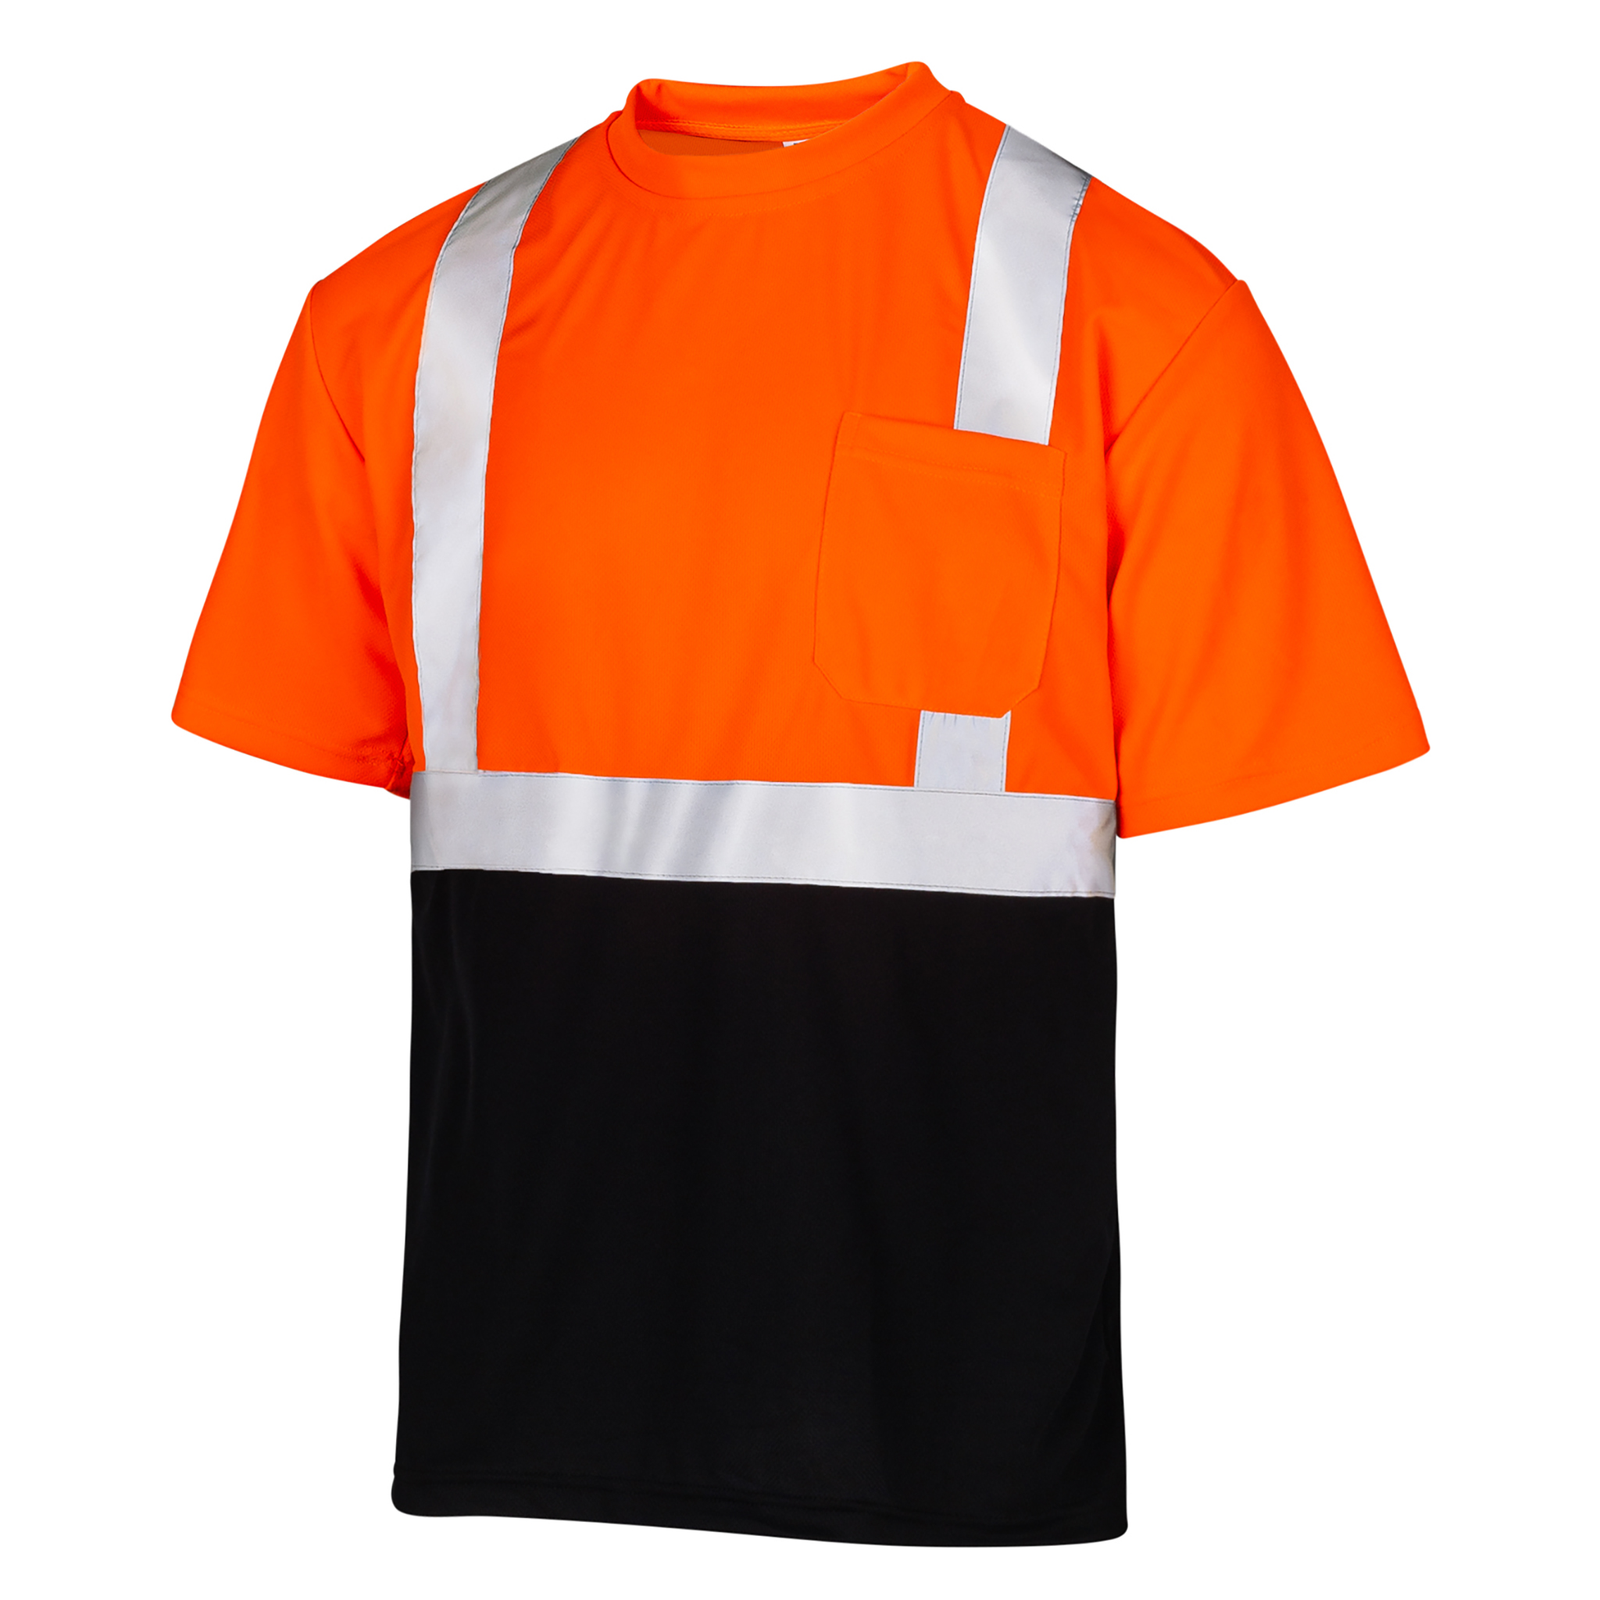 Orange an black safety shirt with reflective stripes and one chest pocket